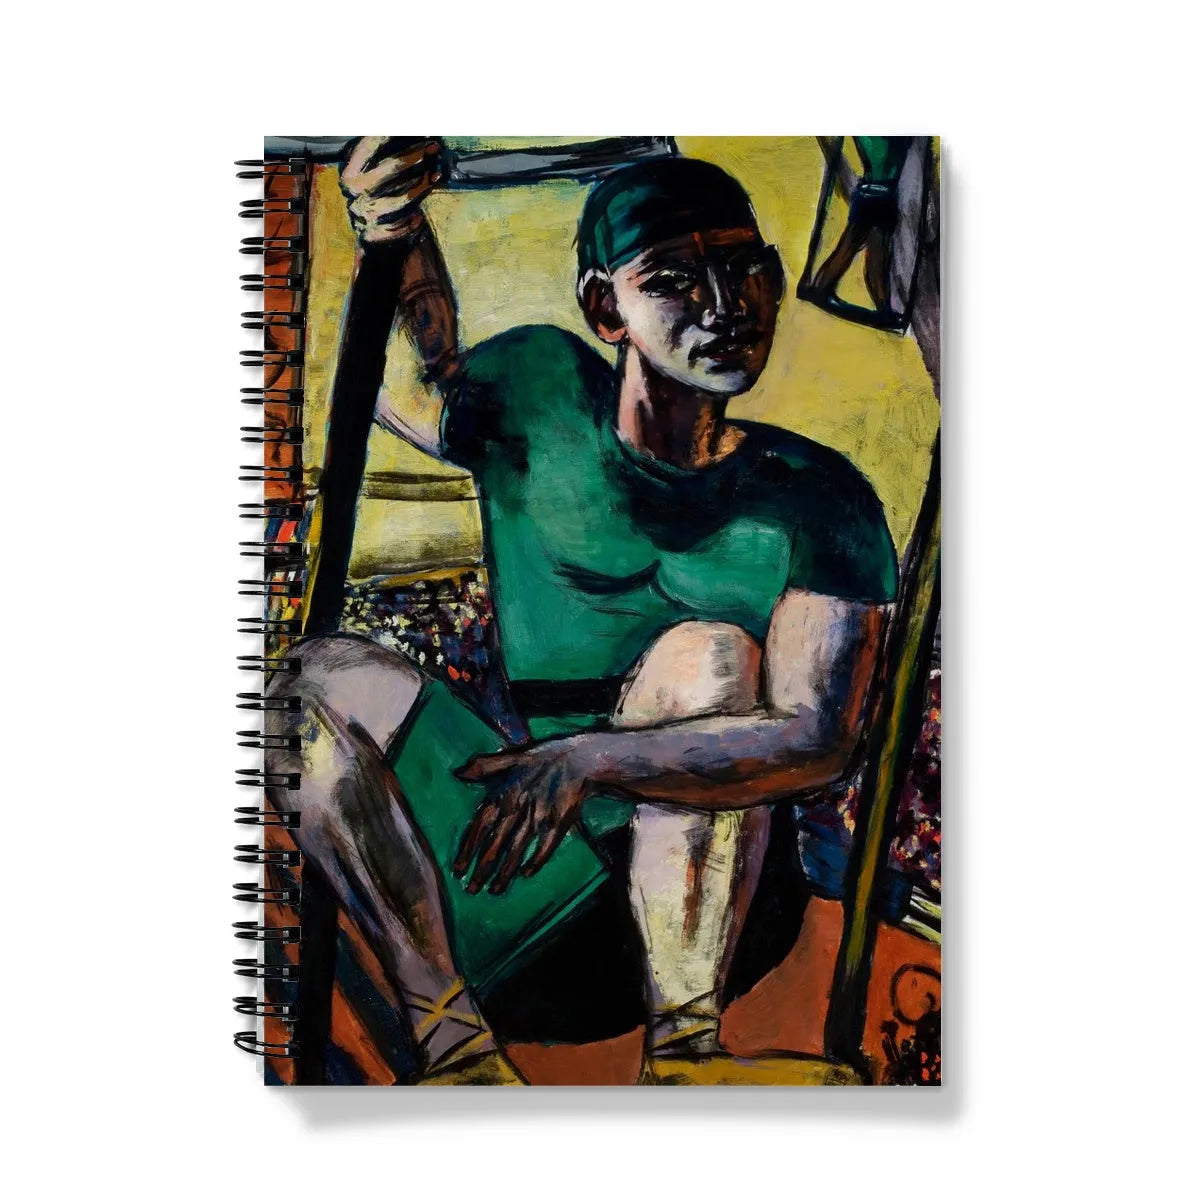 Acrobat On The Trapeze By Max Beckmann Notebook - Notebooks & Notepads - Aesthetic Art